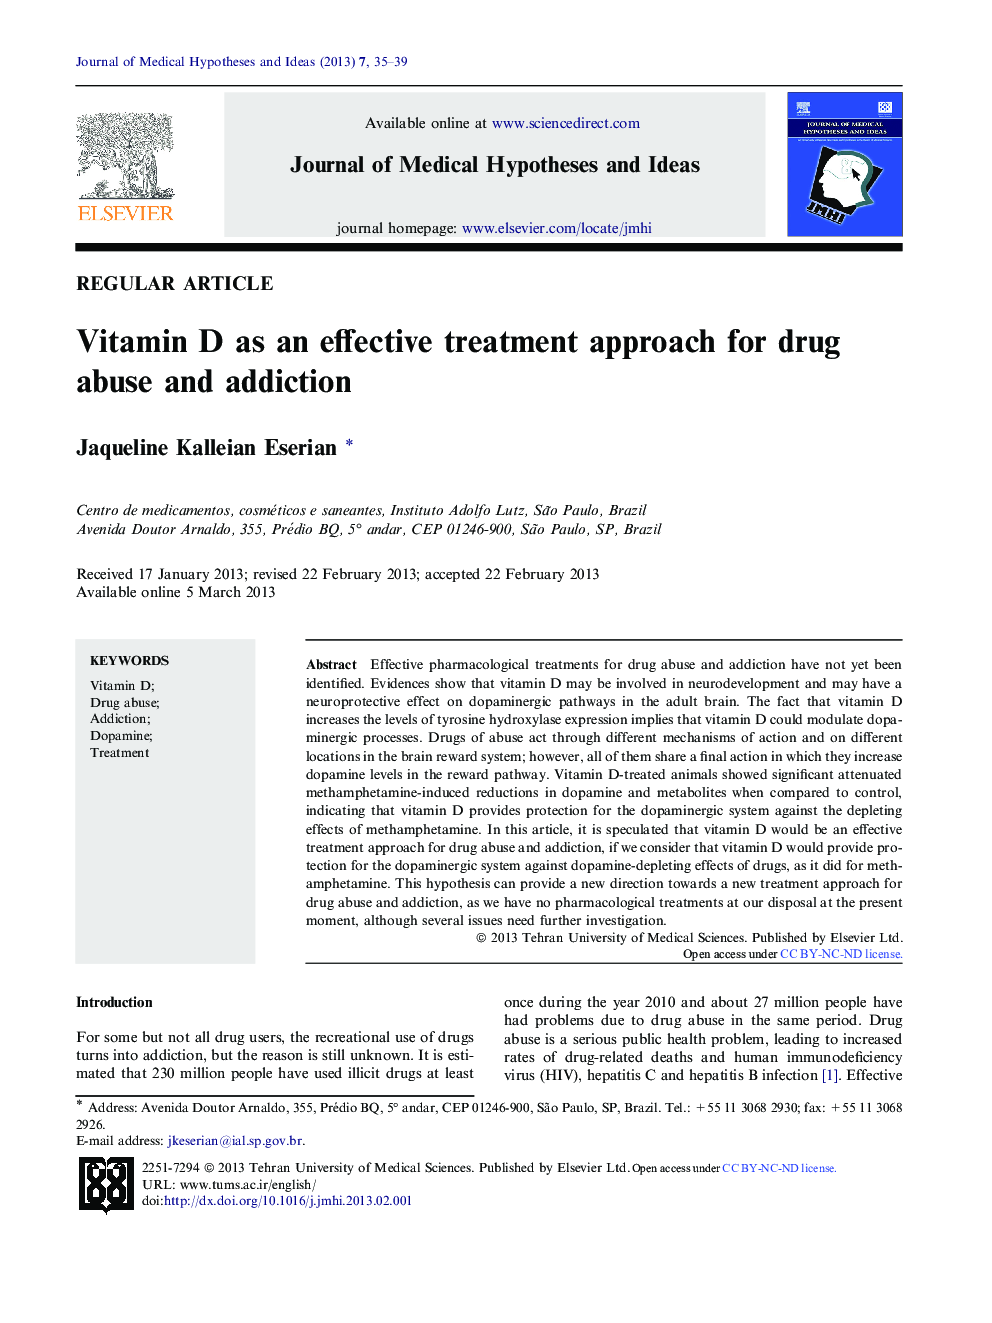 Vitamin D as an effective treatment approach for drug abuse and addiction 